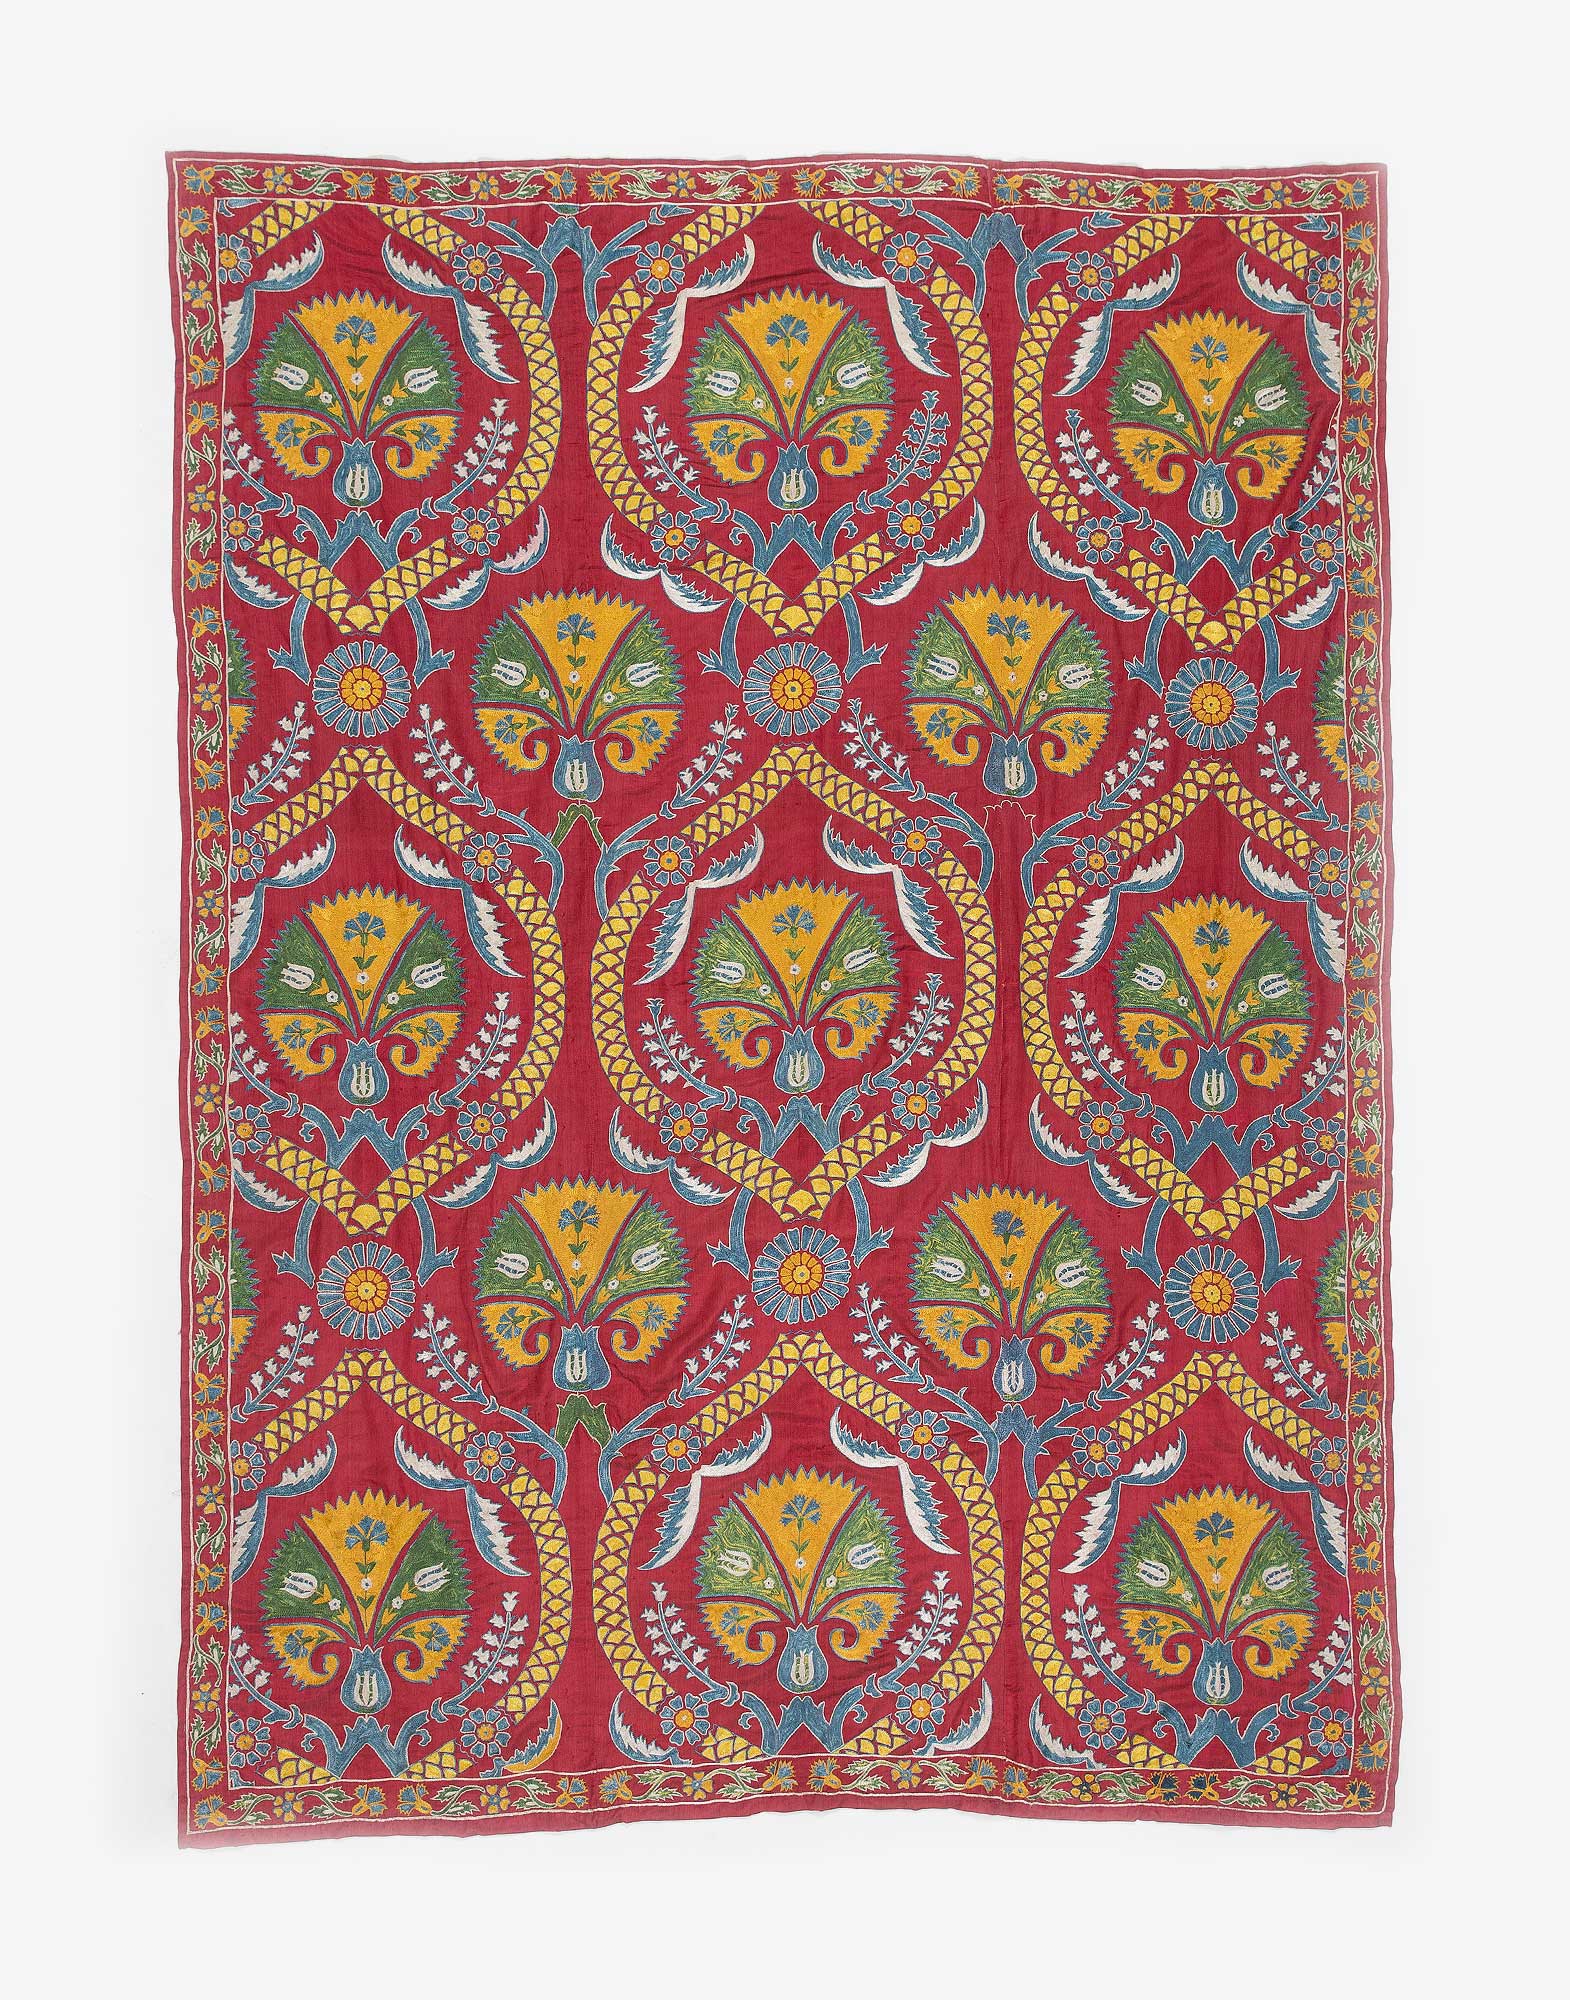 Uzbek Suzani Colorful Embroidered Silk Bed Cover